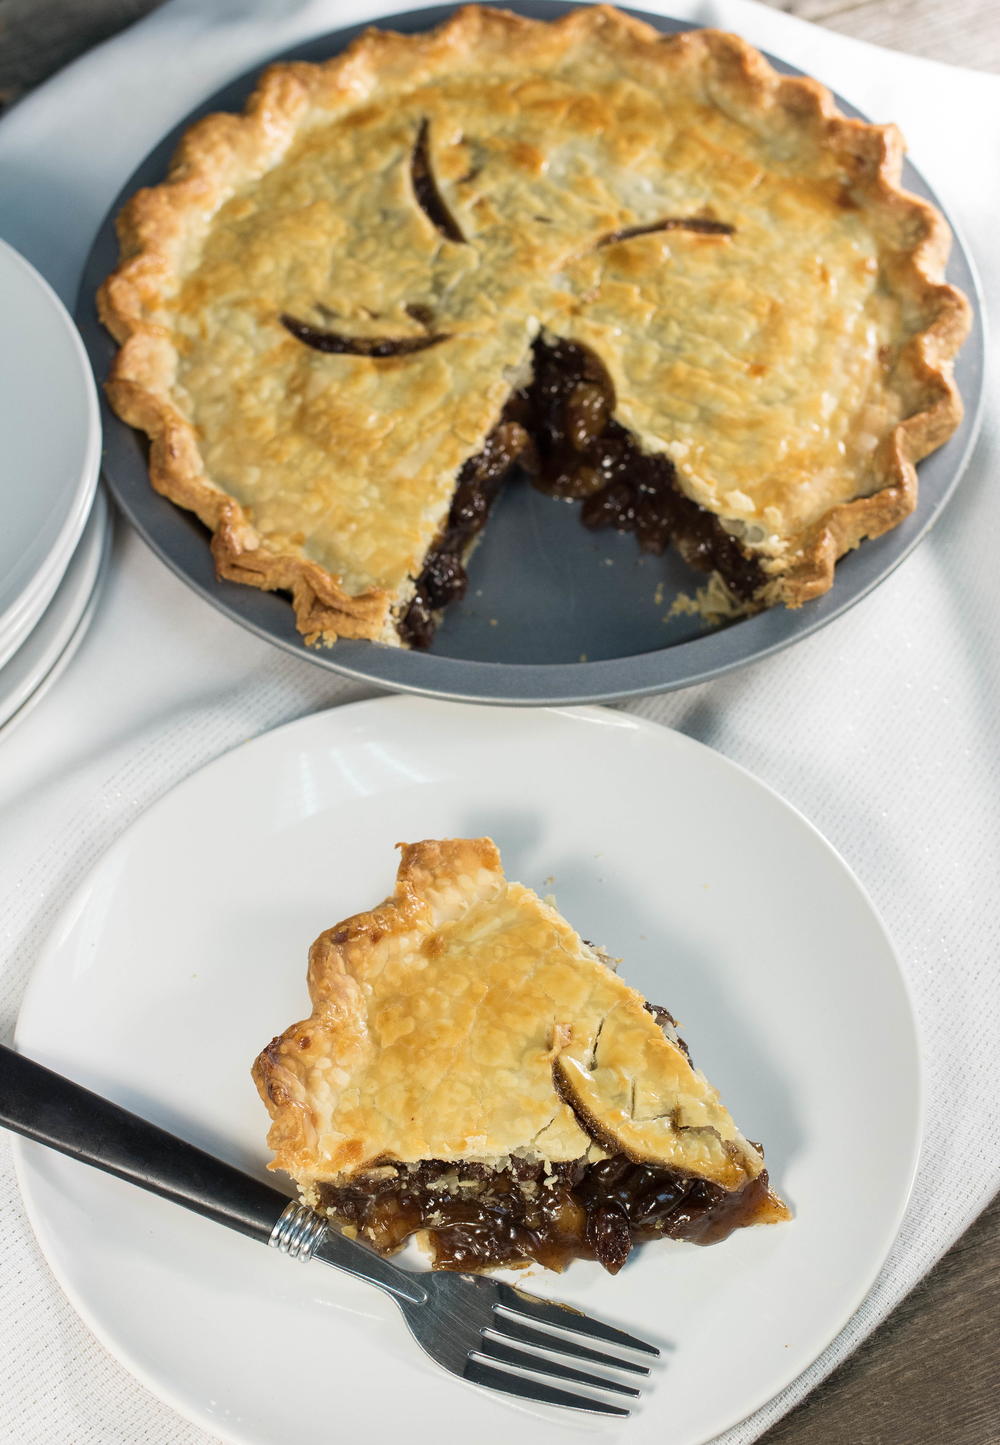 Old-fashioned mincemeat pie recipe from 1798, Our Heritage of Health